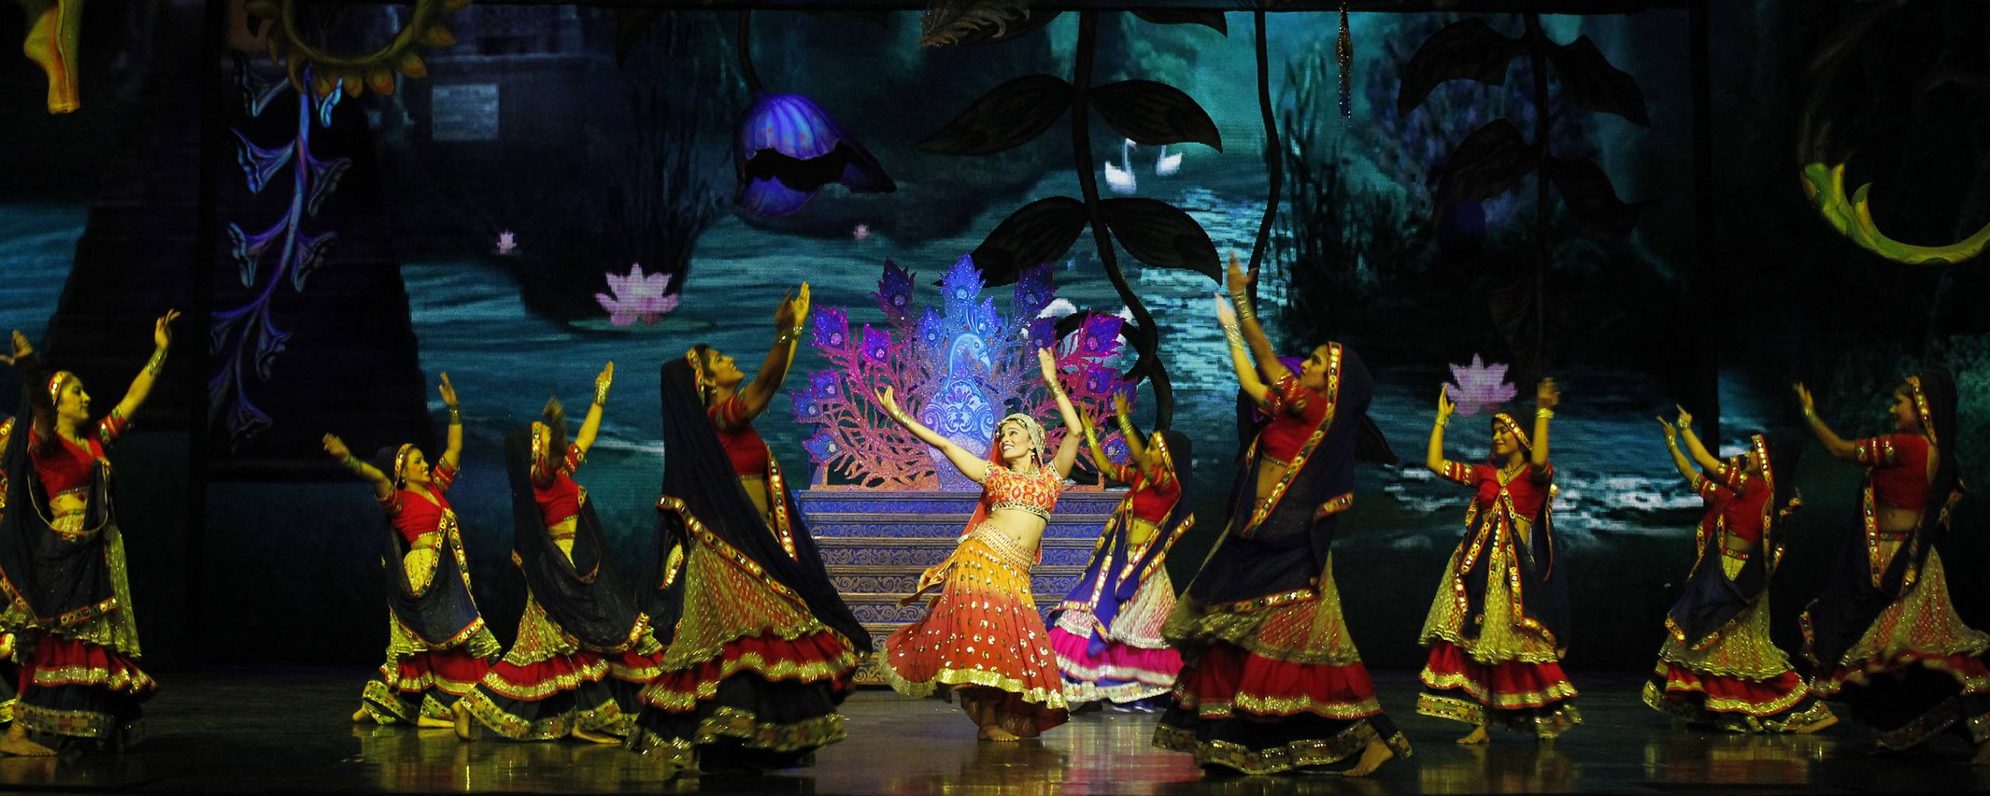 theatre guide beyond bollywood